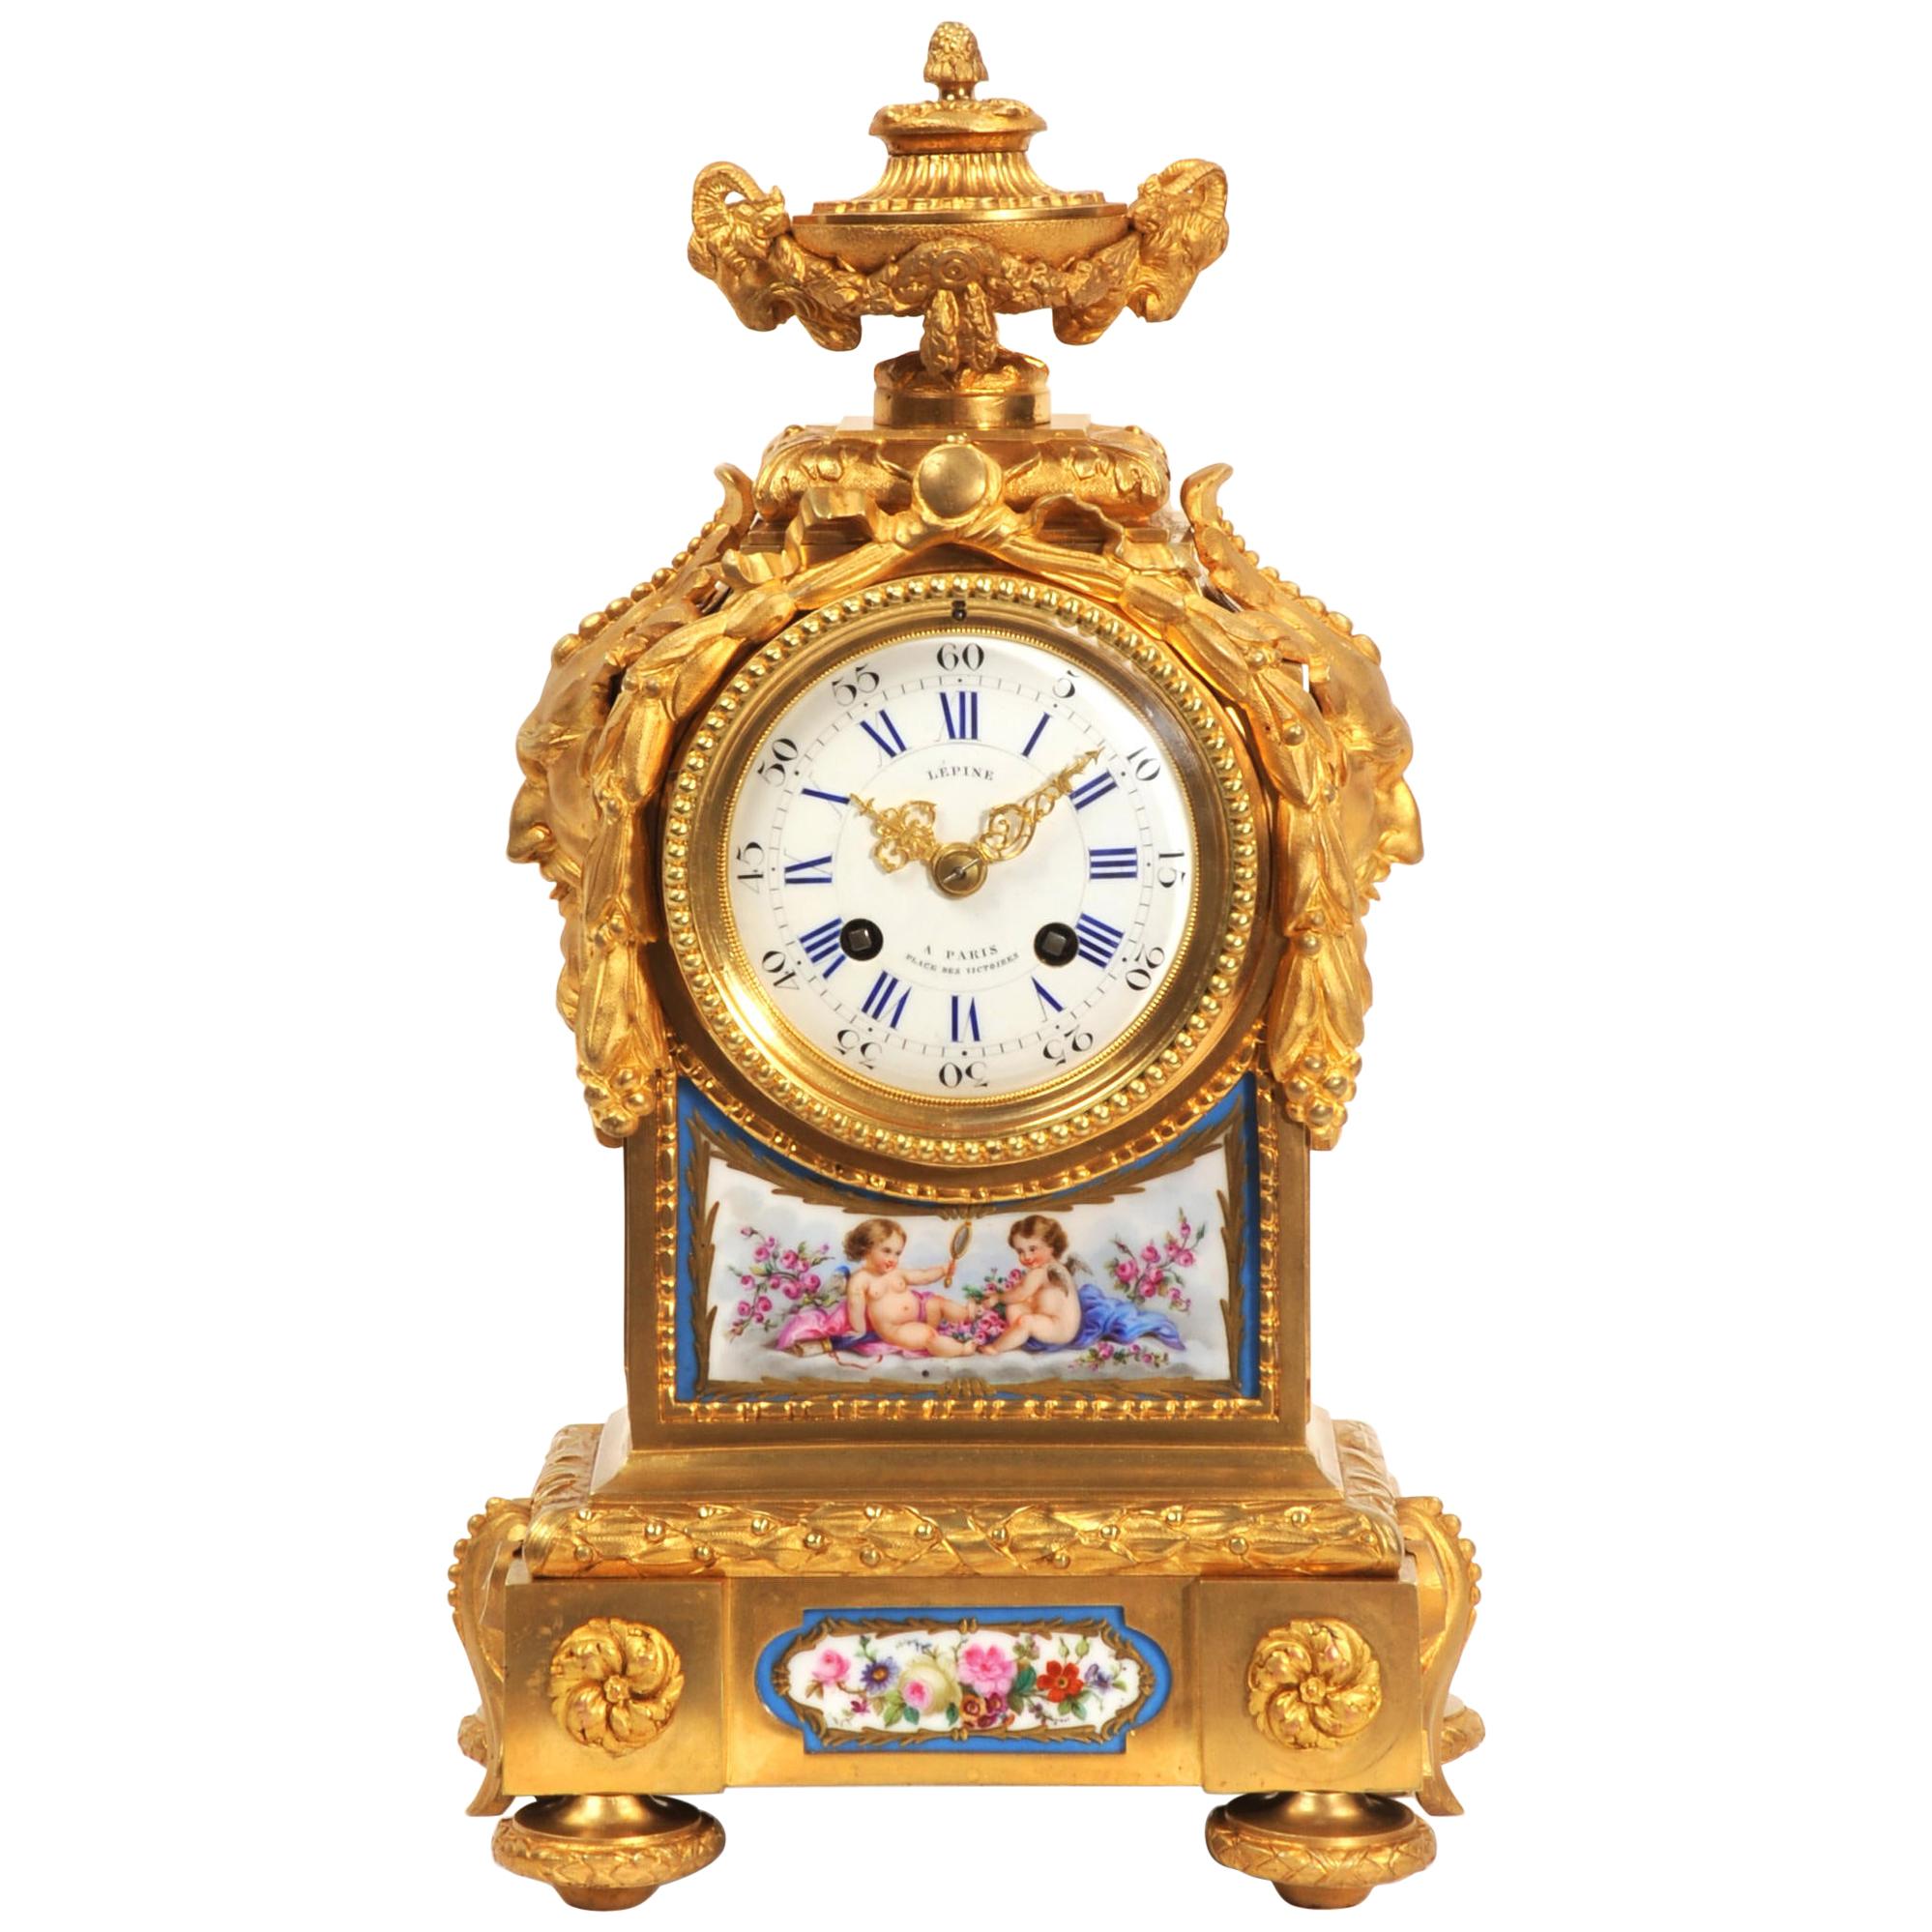 Early Ormolu and Sevres Porcelain Antique French Clock by Lepine Paris